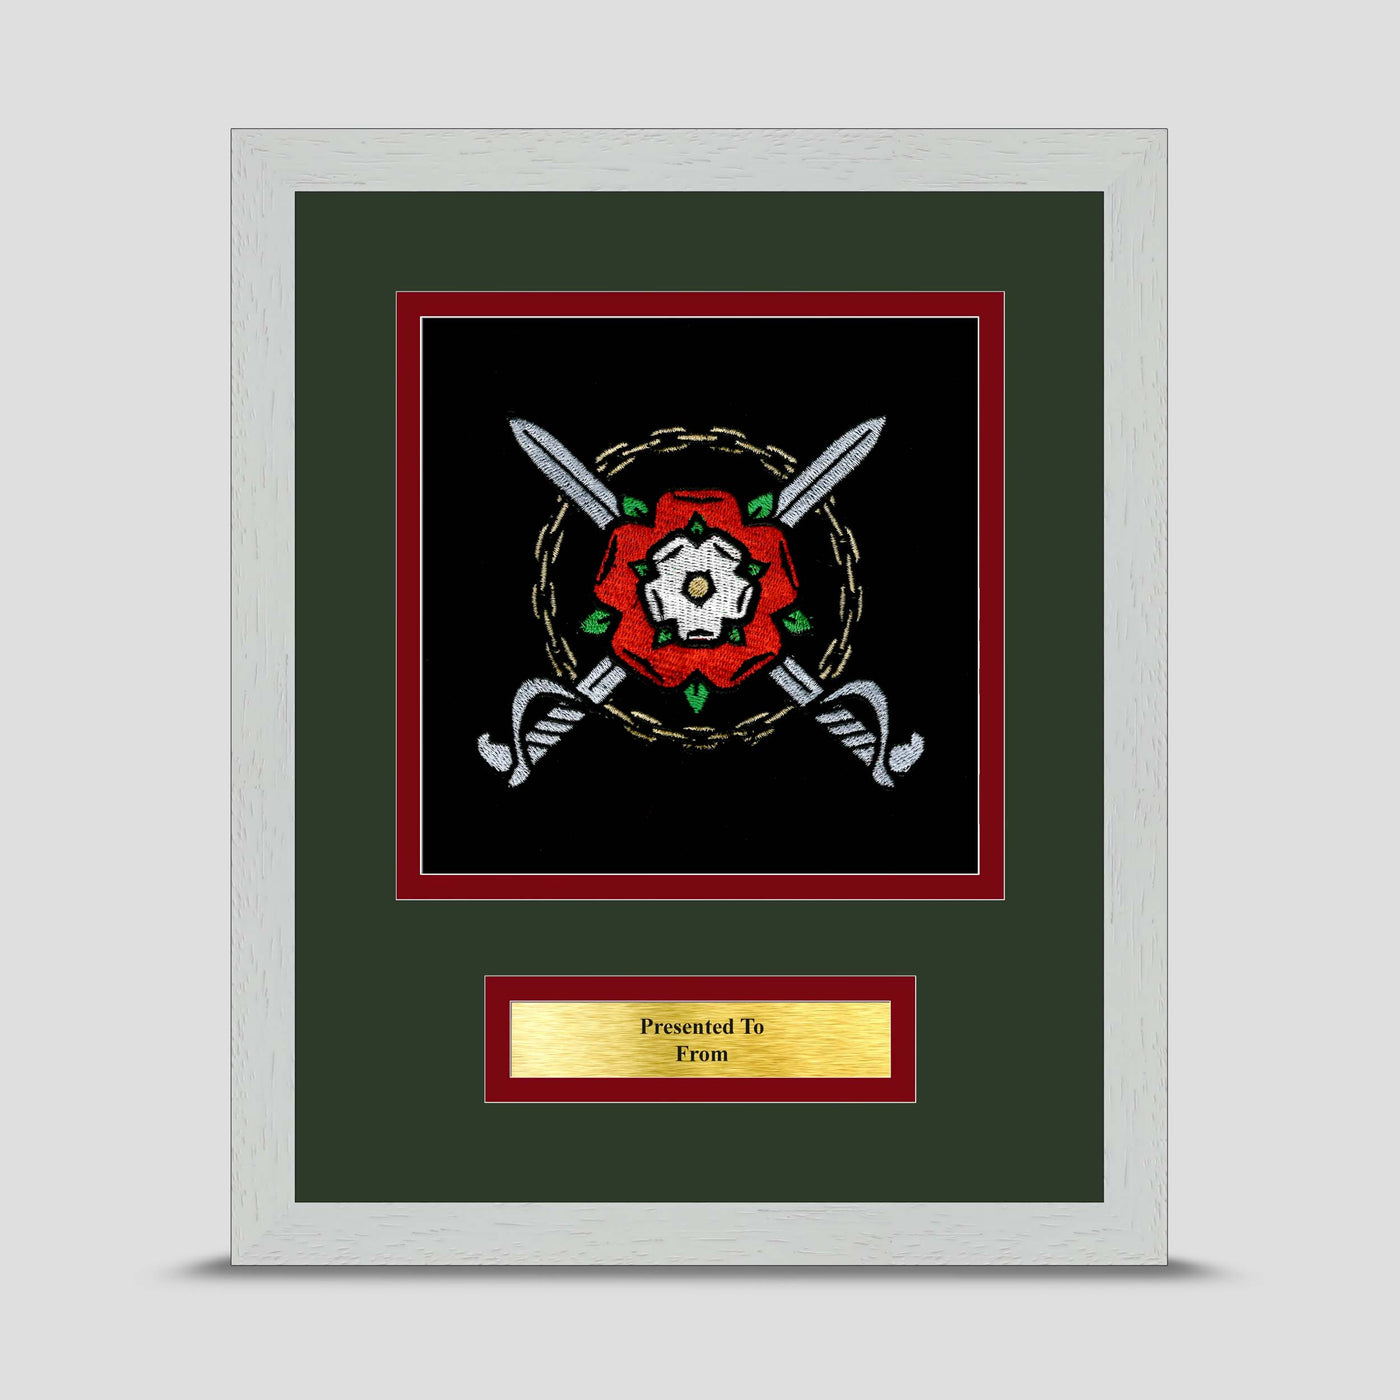 31 Coy 3 Military Intelligence Corps Framed Military Embroidery Presentation